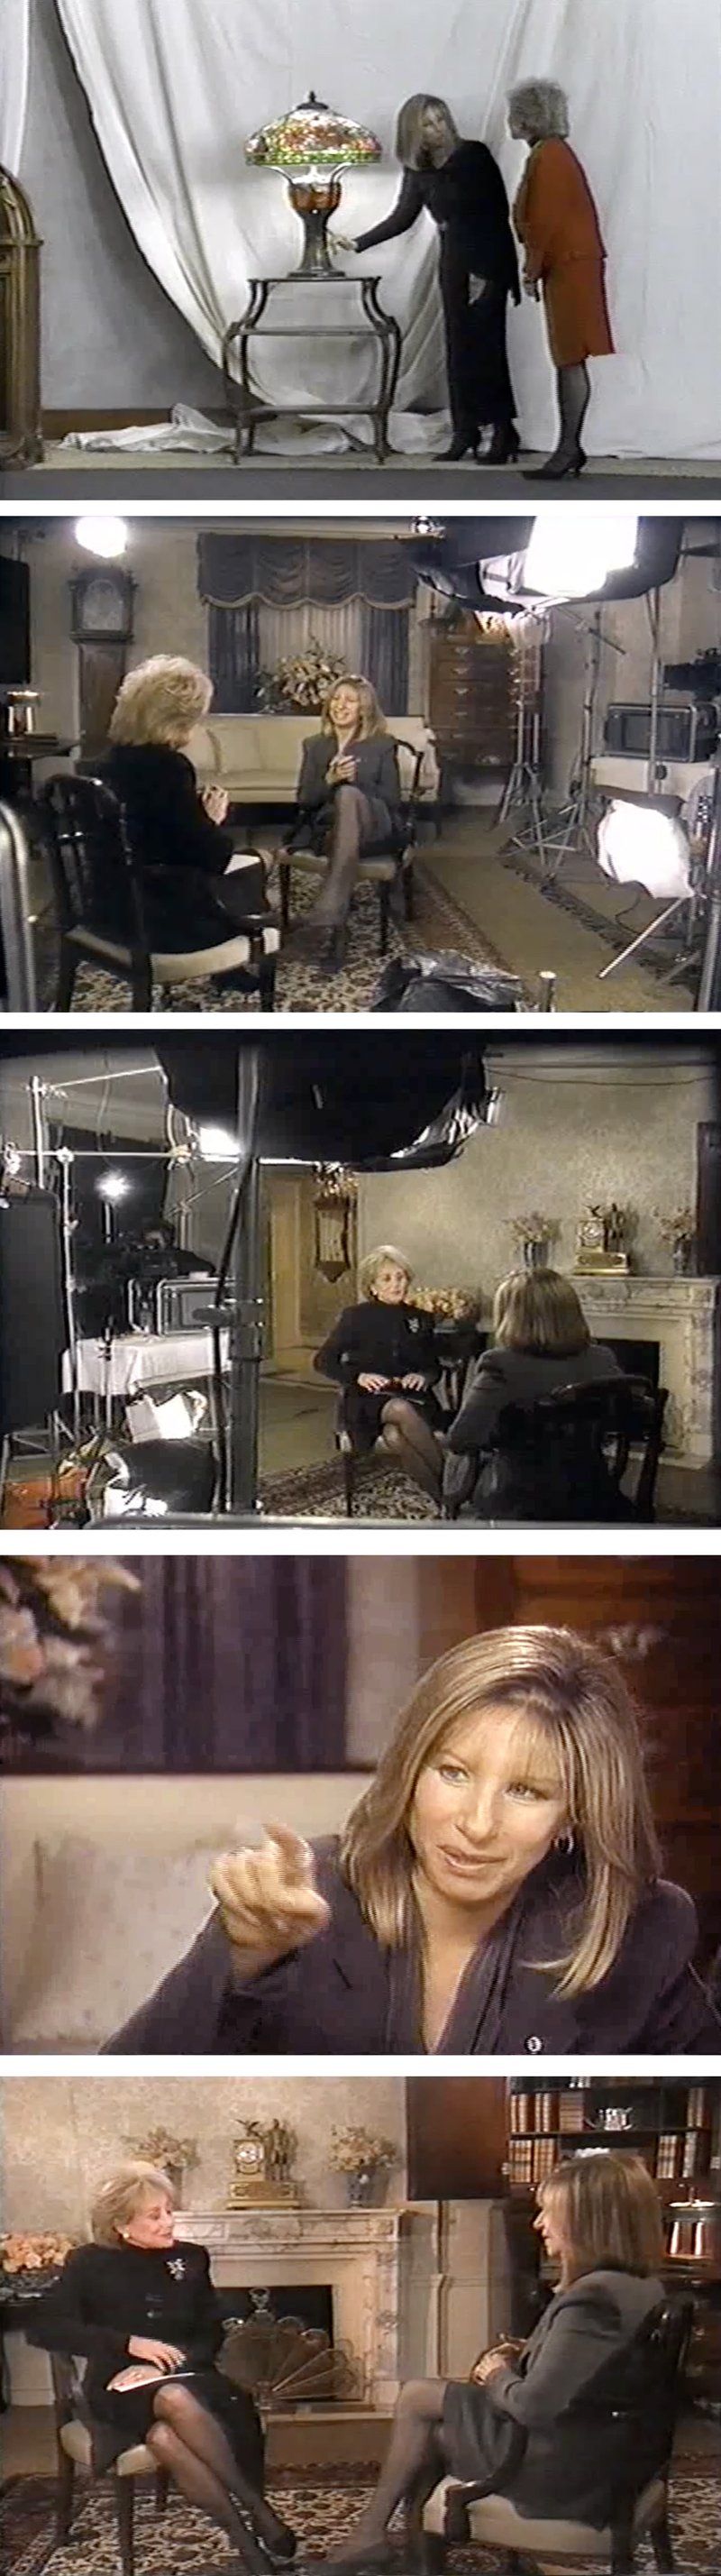 Scenes from Barbara Walters 1993 interview with Barbra Streisand.